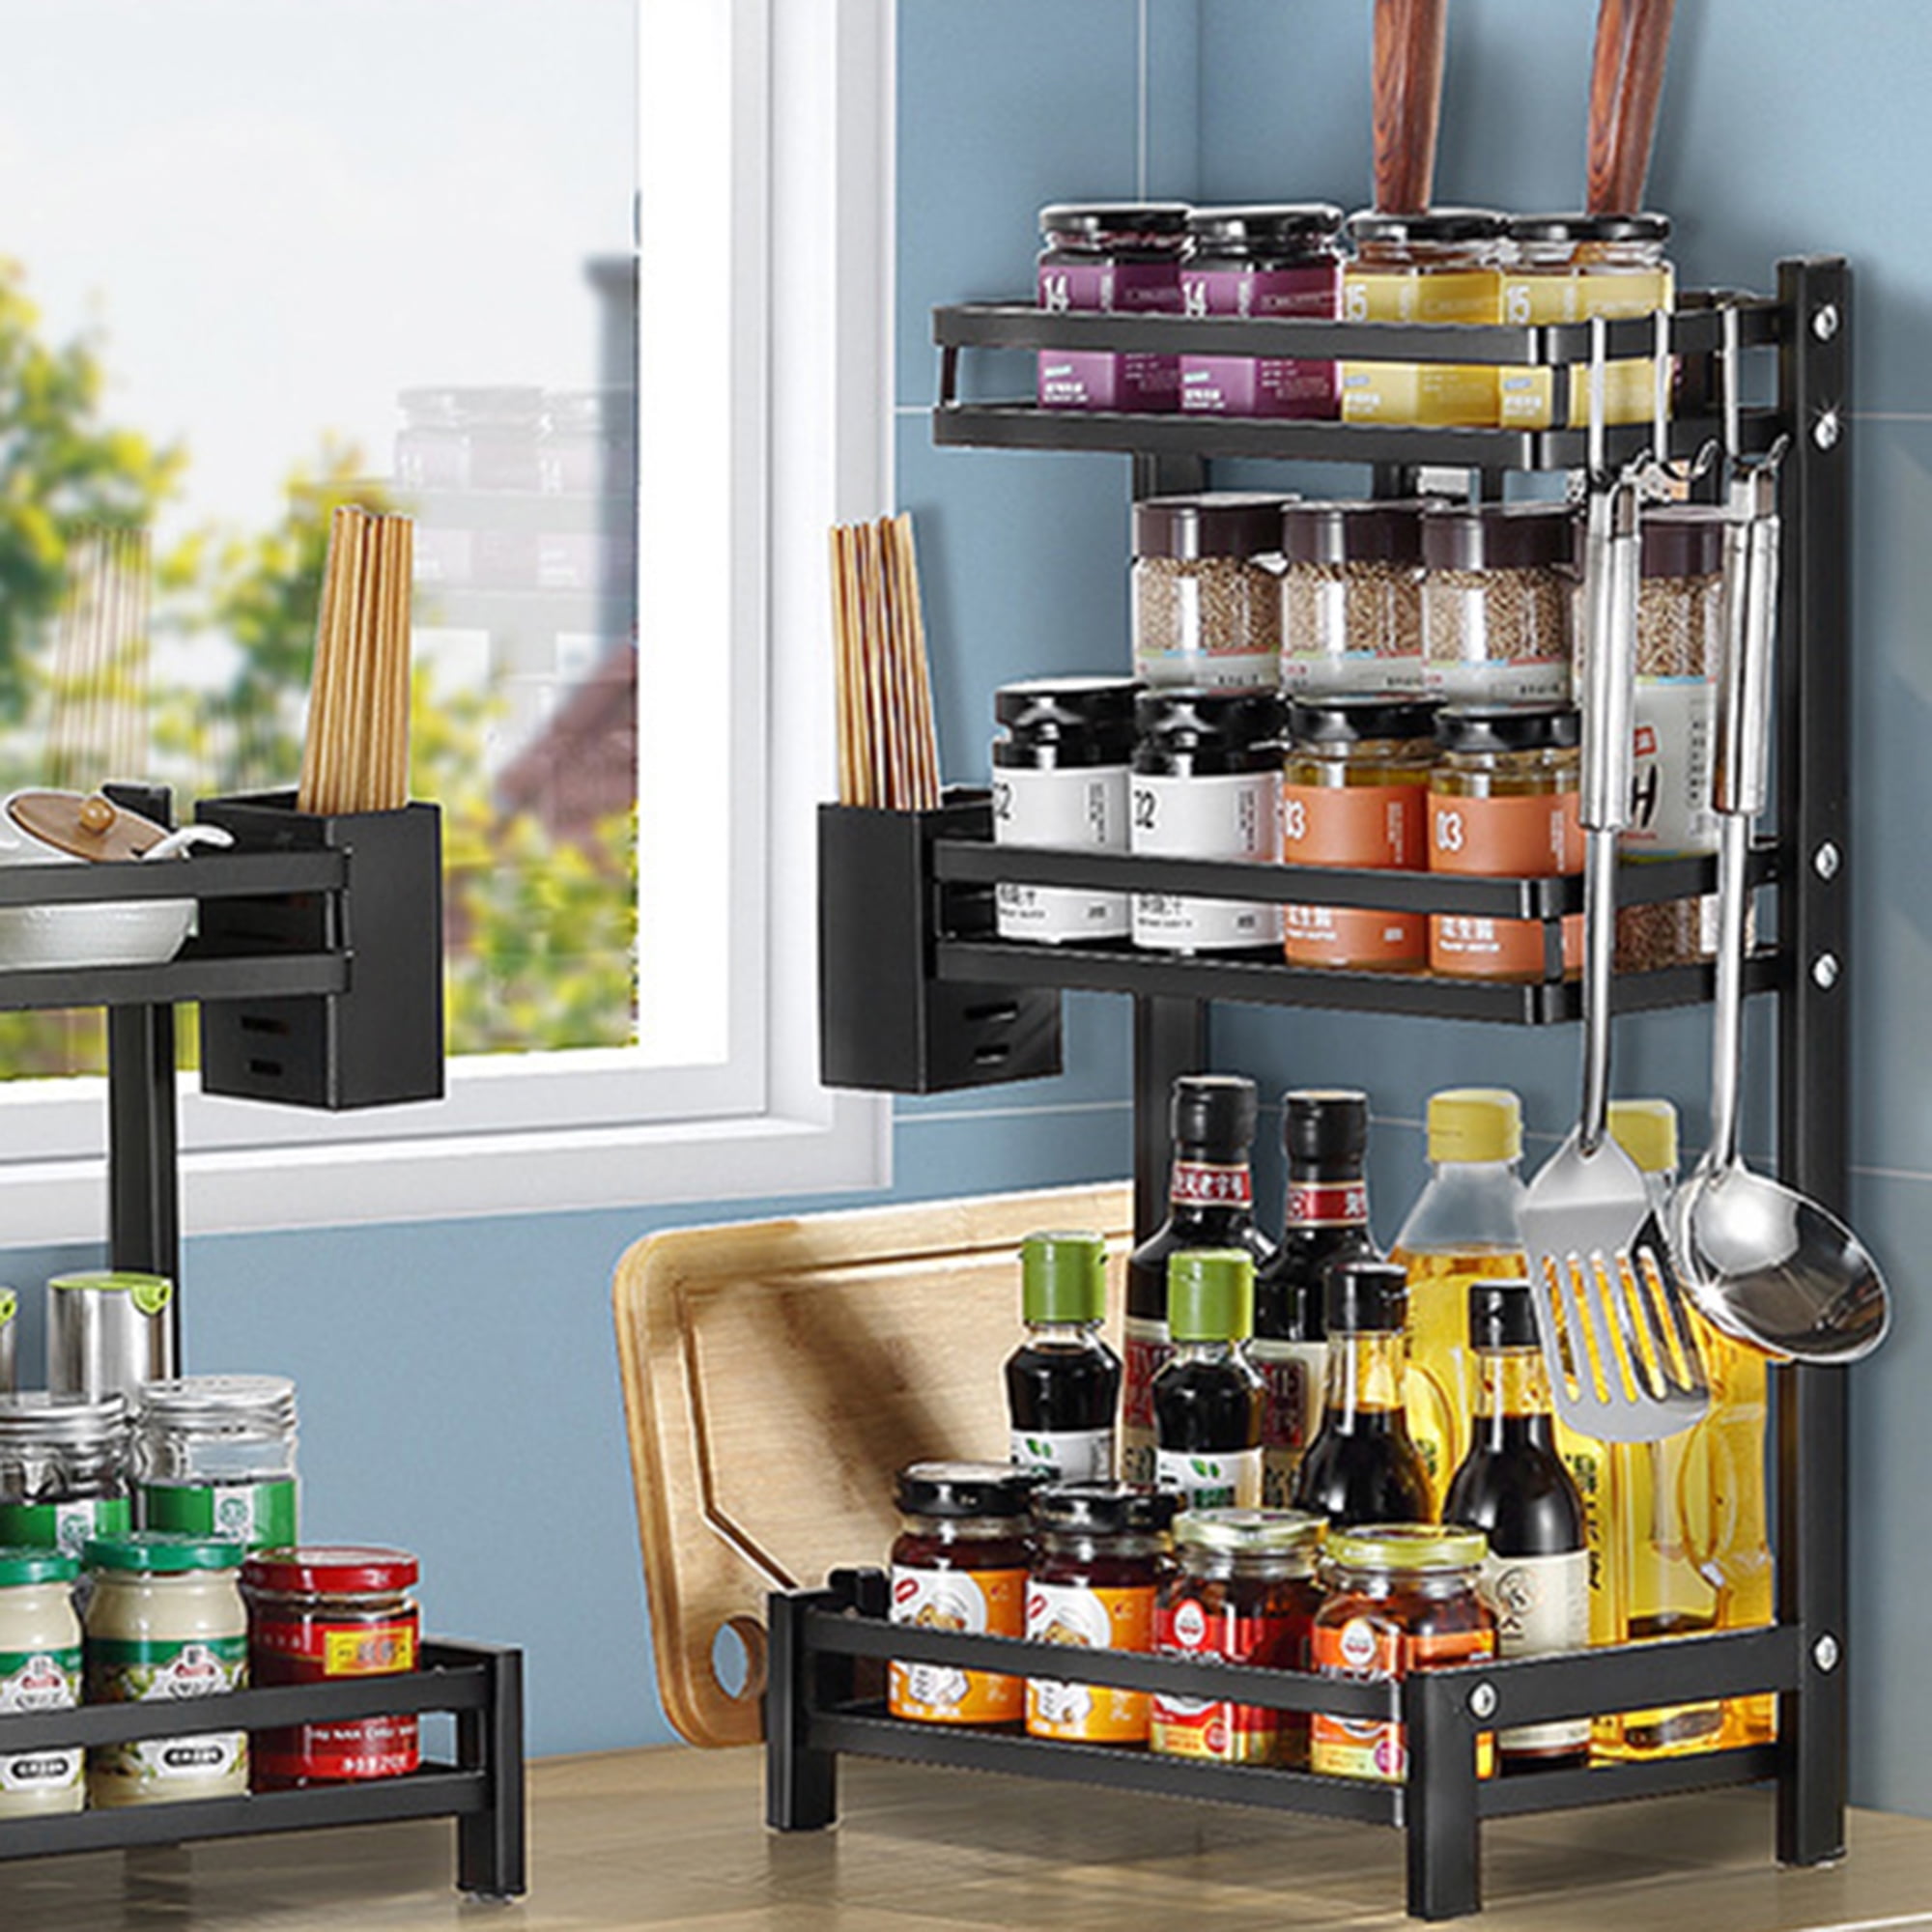 Spice Rack Wall Mounted Black Steel 3 Shelves Spices Organizer Kitchen Gadgets 